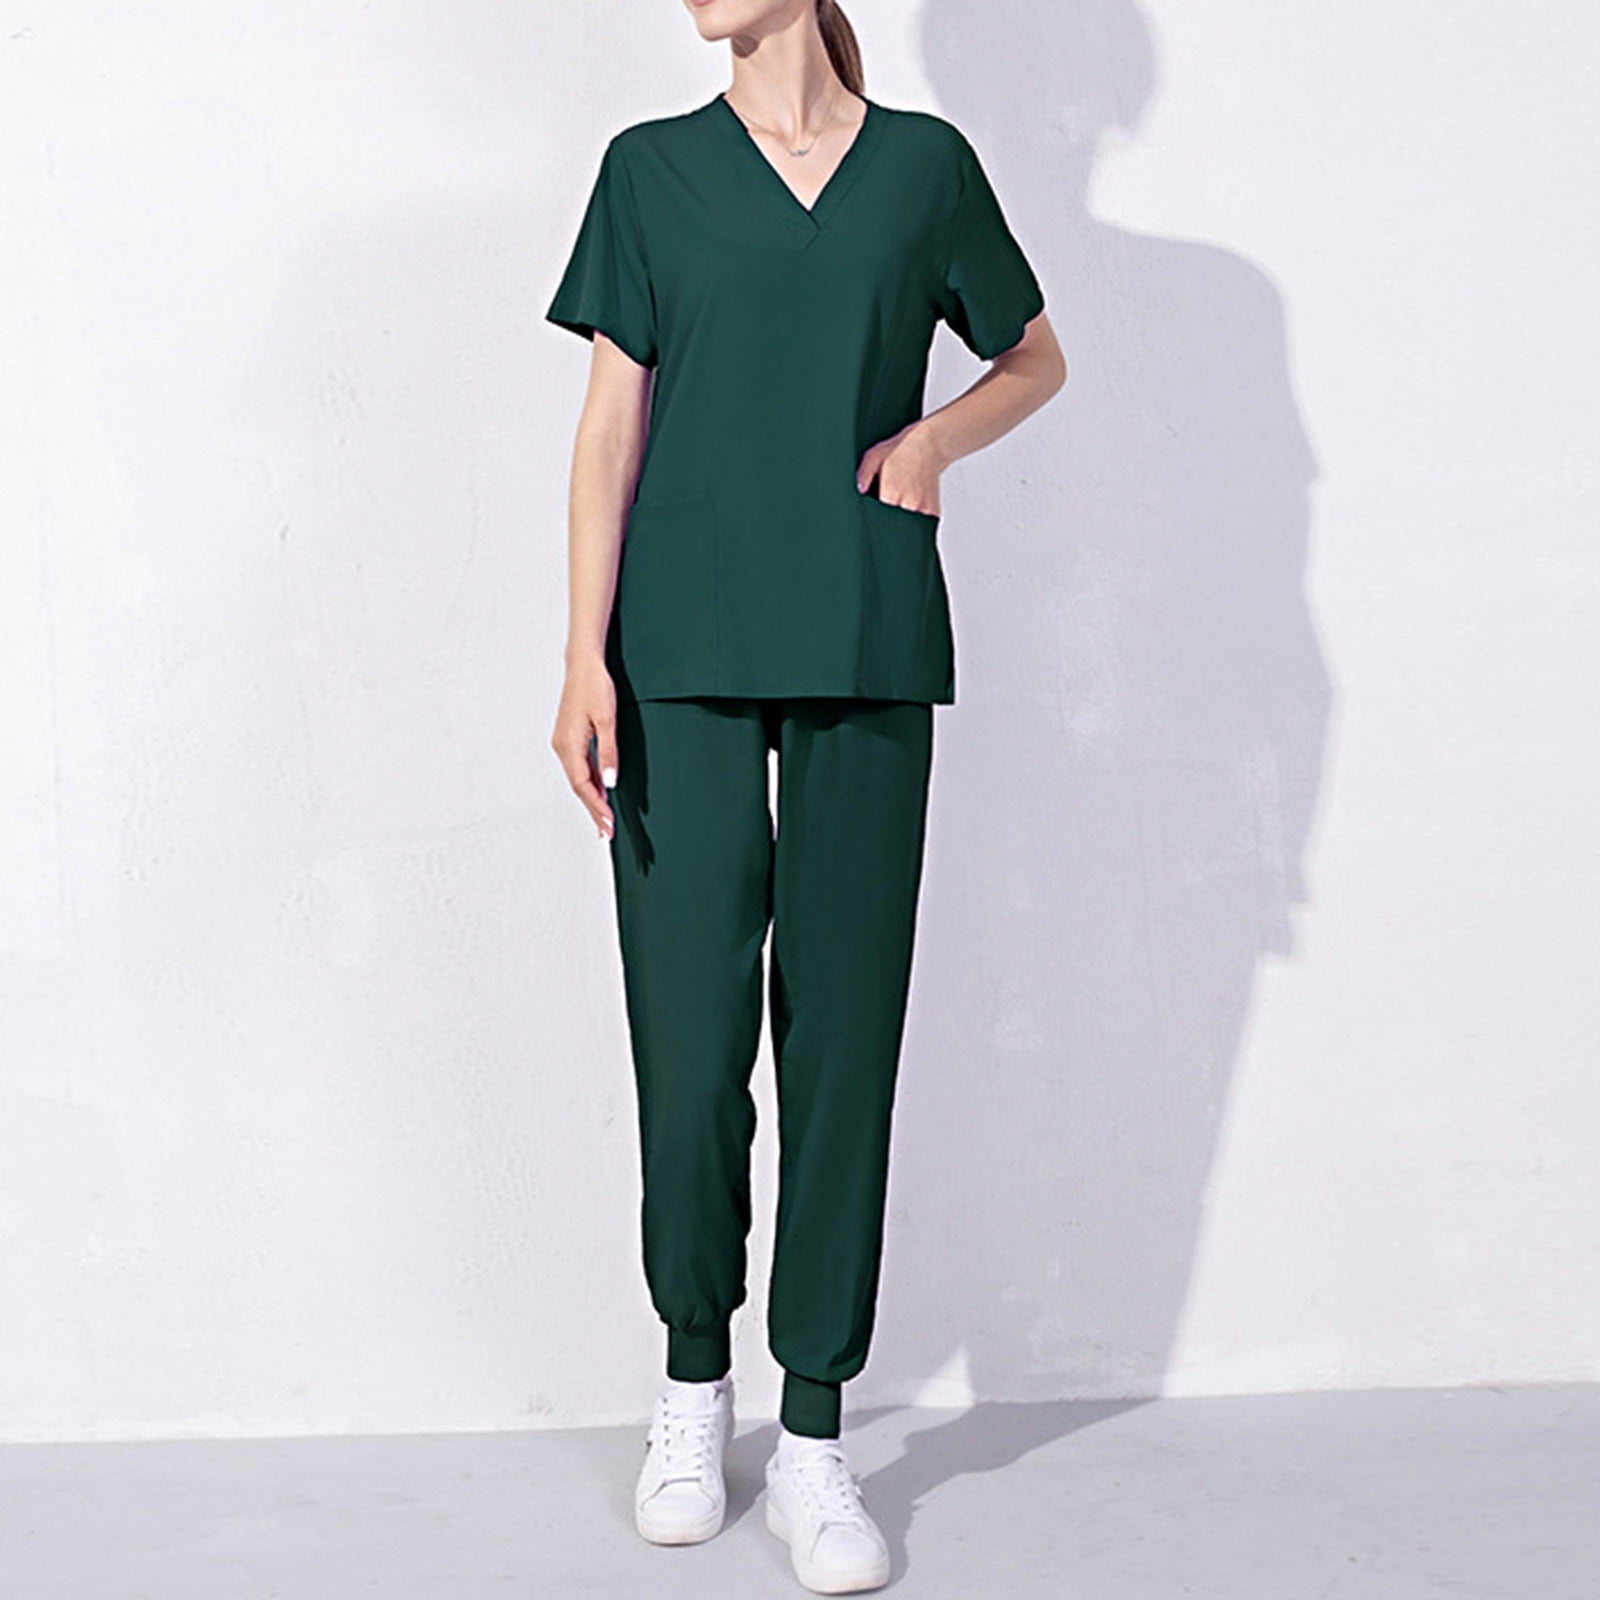 EGNMCR Nursing Scrub Workwear Sets for Women Solid Color T Shirt with ...